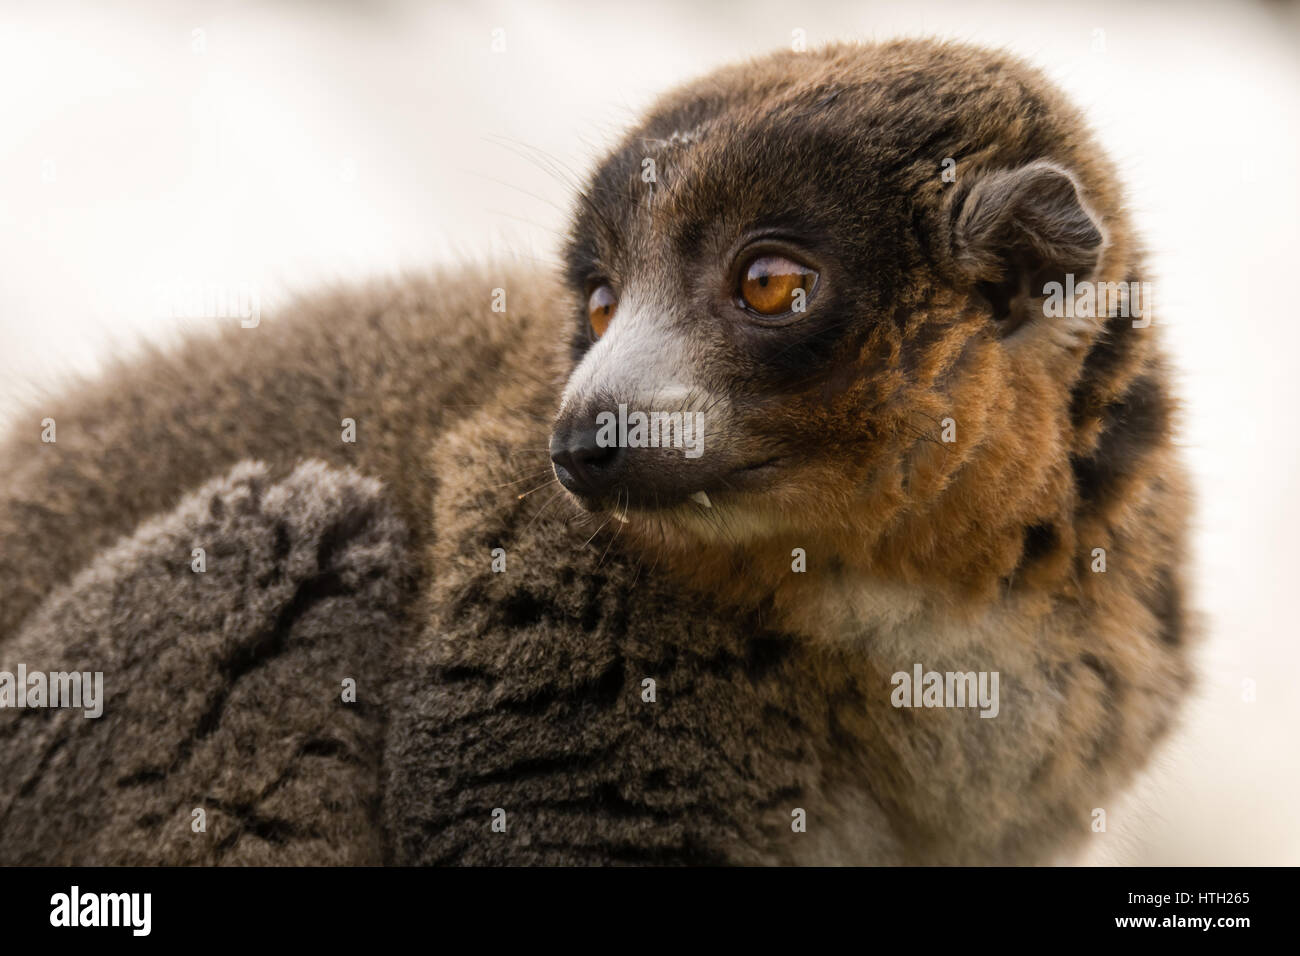 Mongoose lemur (Eulemur mongoz) showing canines. Male arboreal primate in the Lemuridae family, native to Madagascar and the Comoros Islands Stock Photo